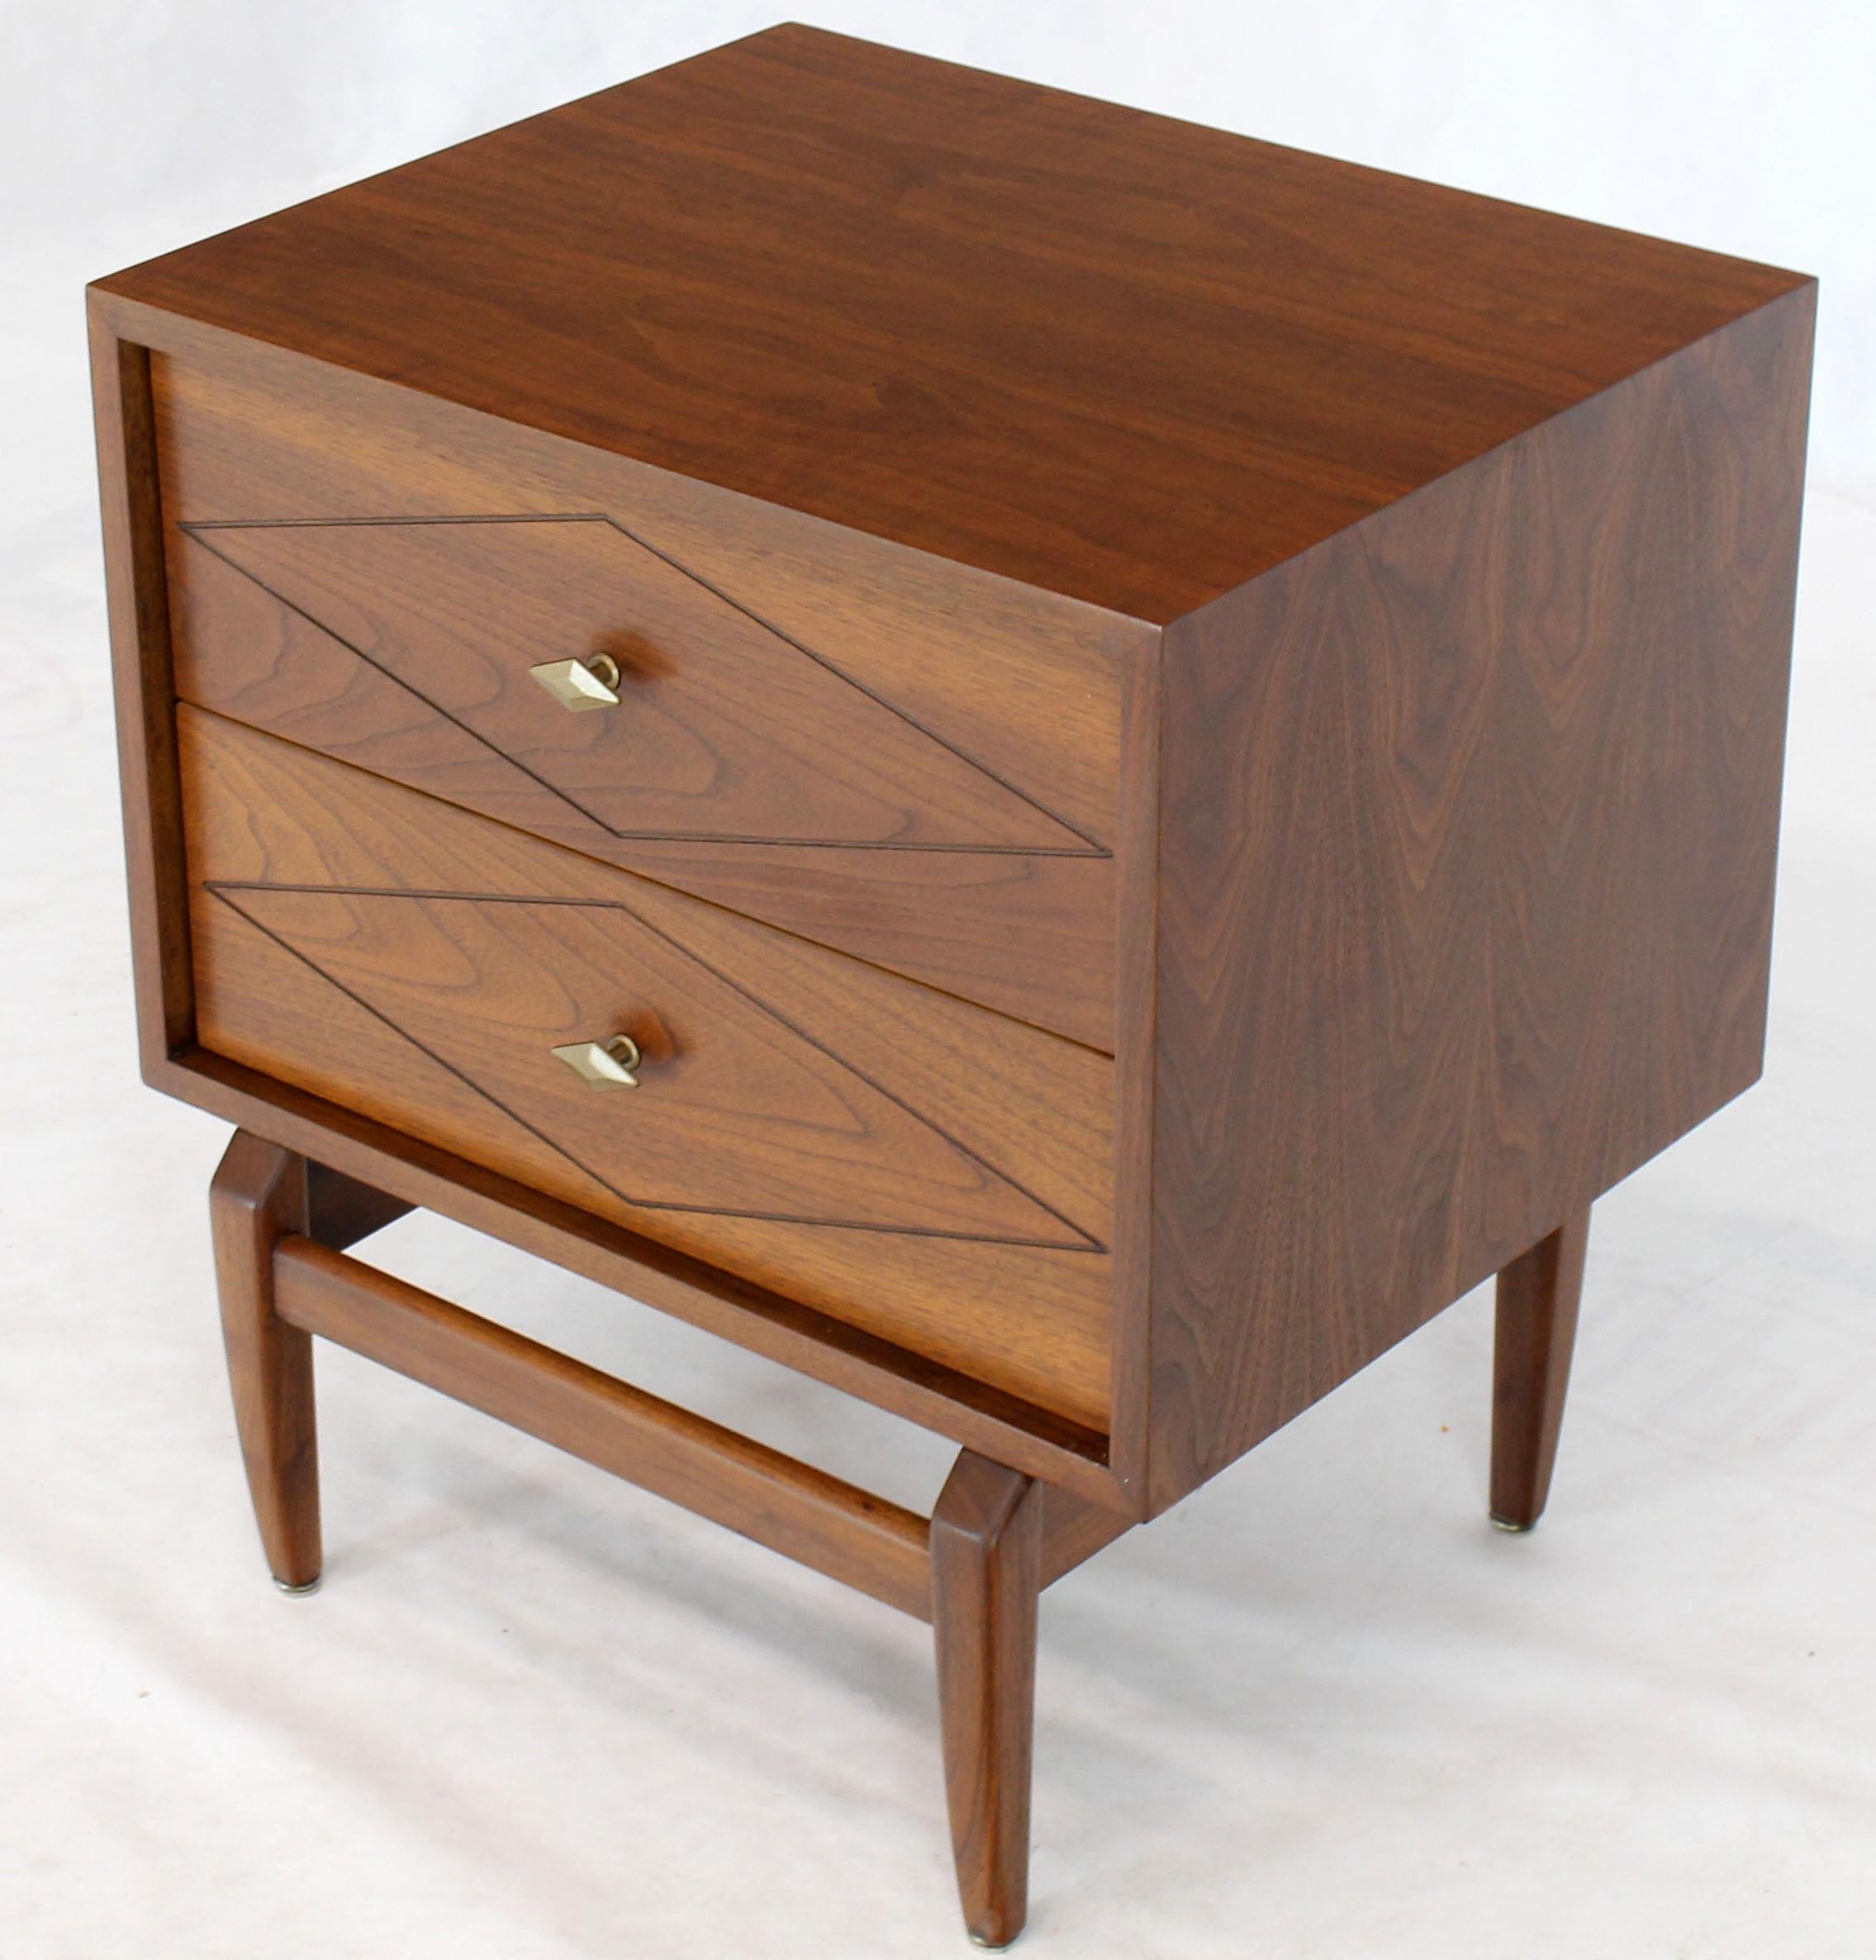 Pair of Mid-Century Modern walnut end tables nightstands two drawers cabinets. Beautiful medium walnut finish. Sculptural solid walnut legs. Super clean condition.
 